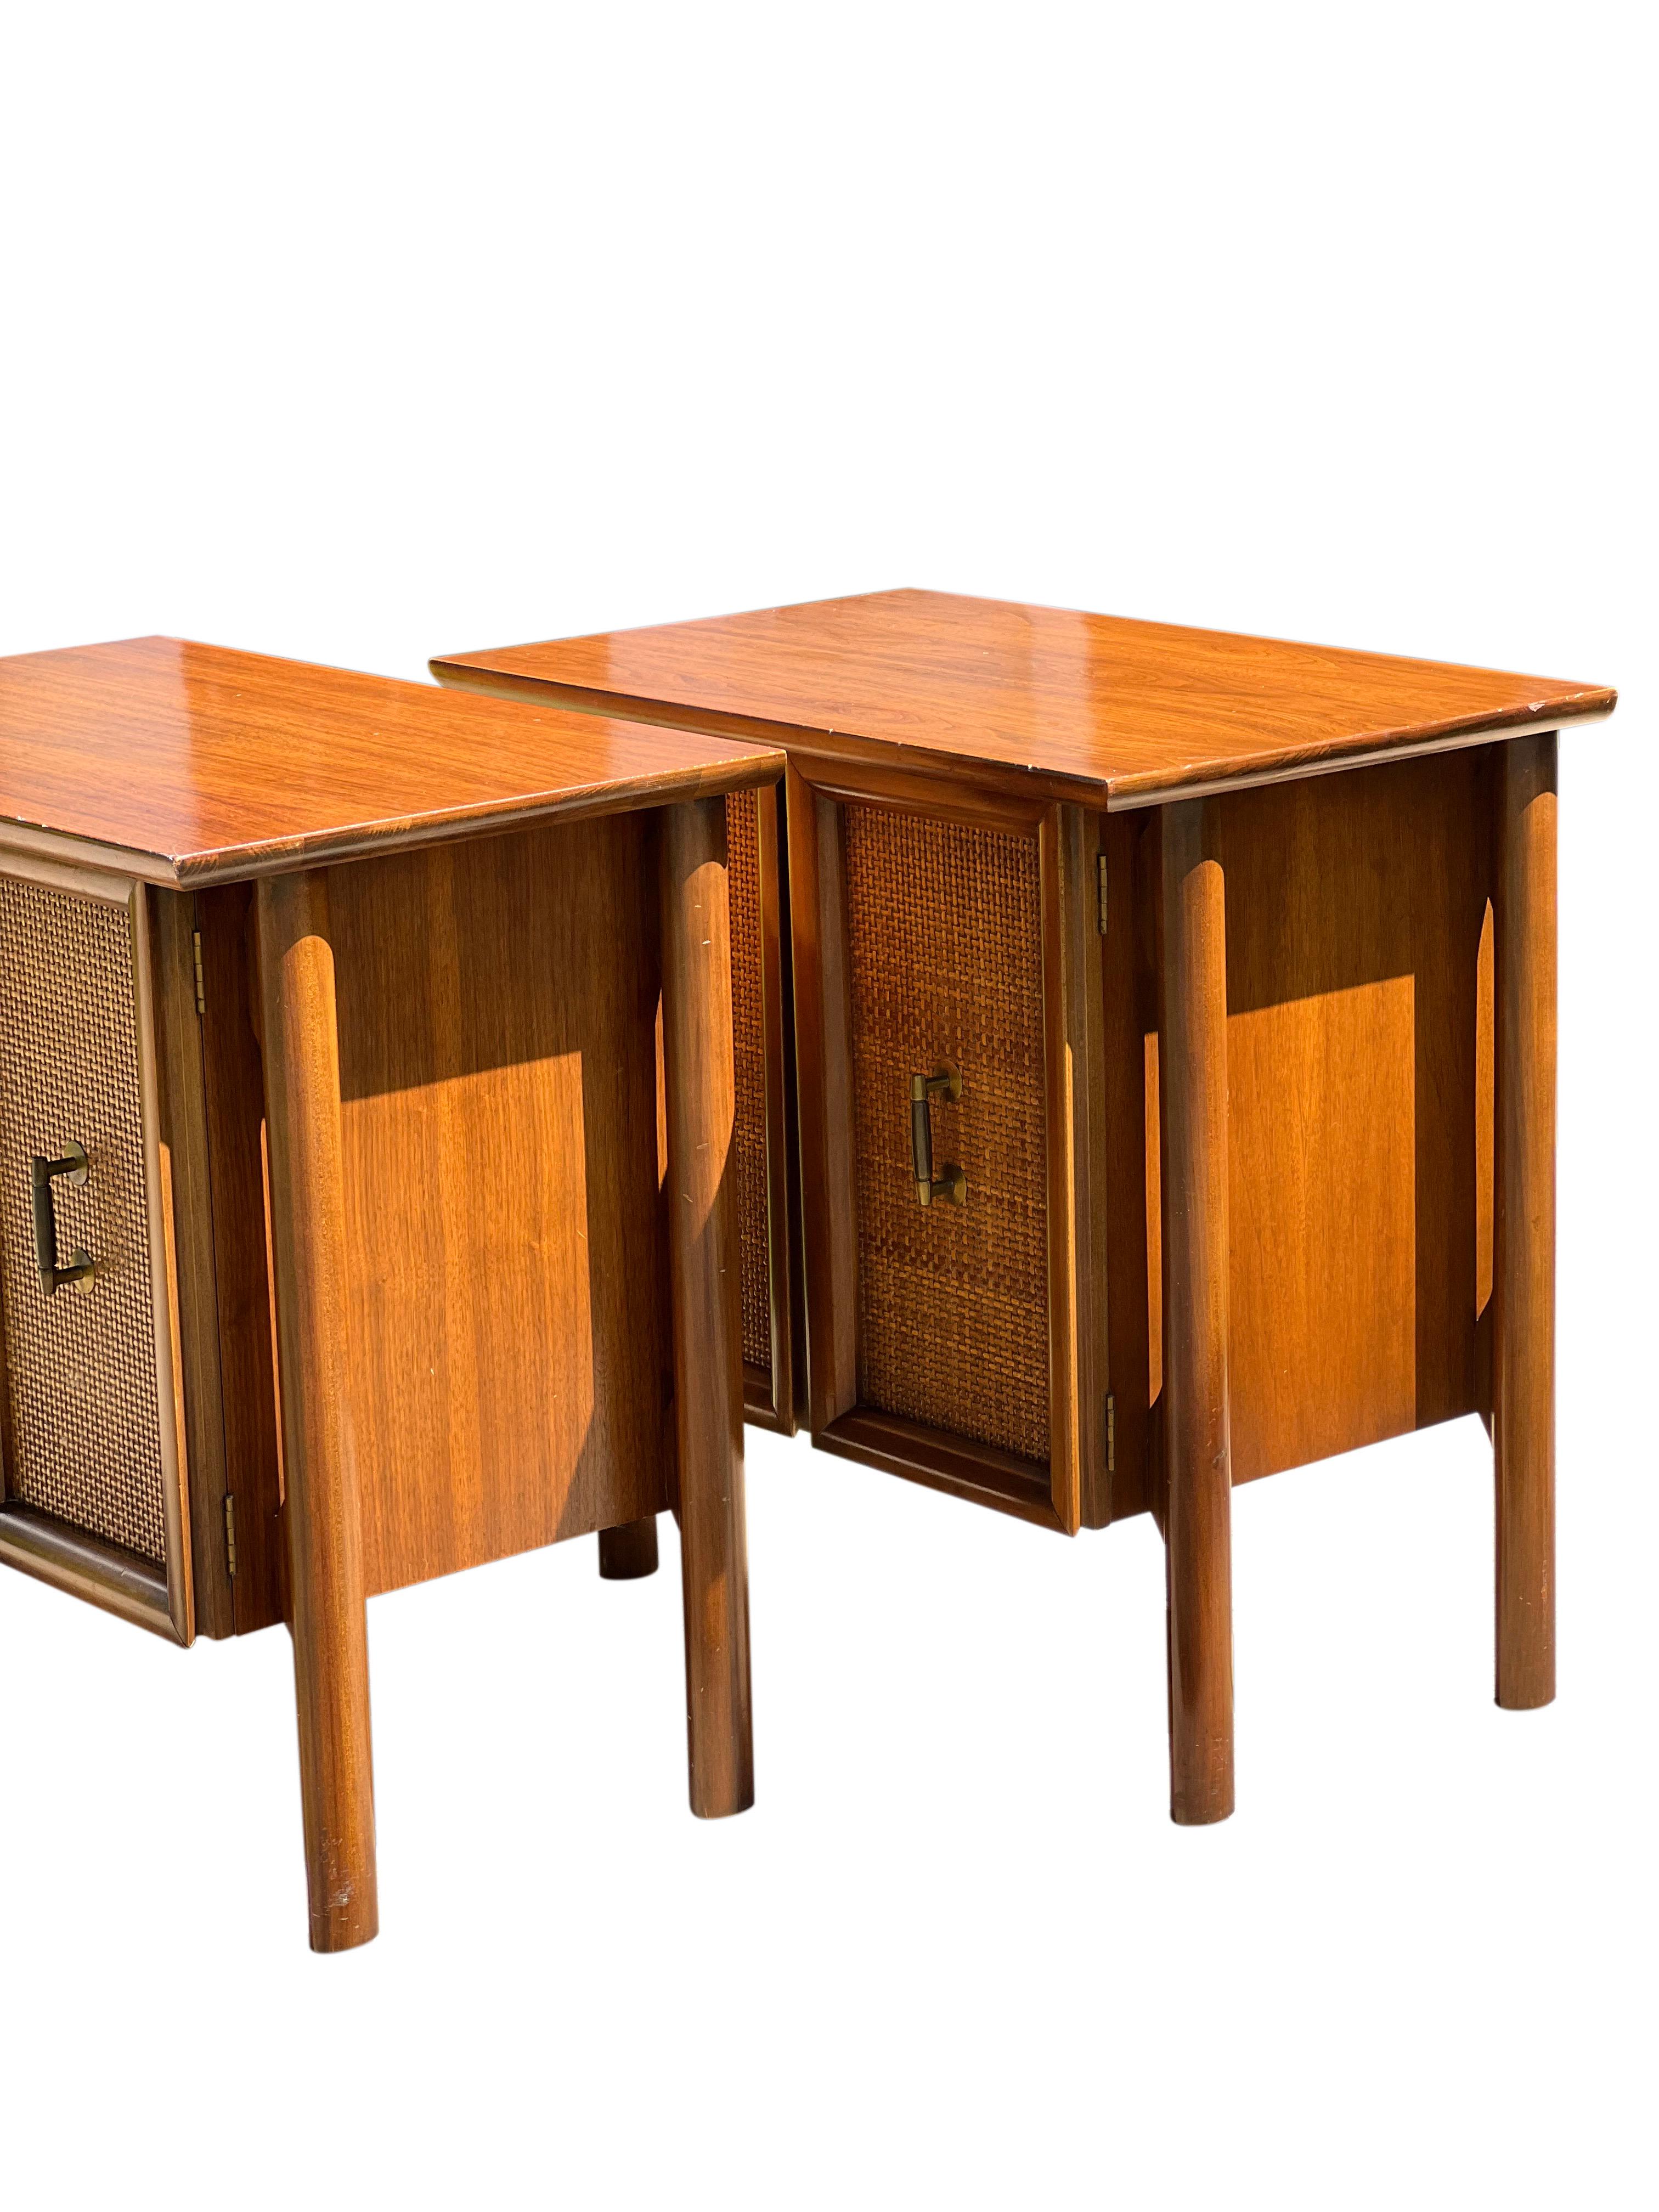 Unknown Mid Century Walnut Floating Nightstands with Cane Panel Doors